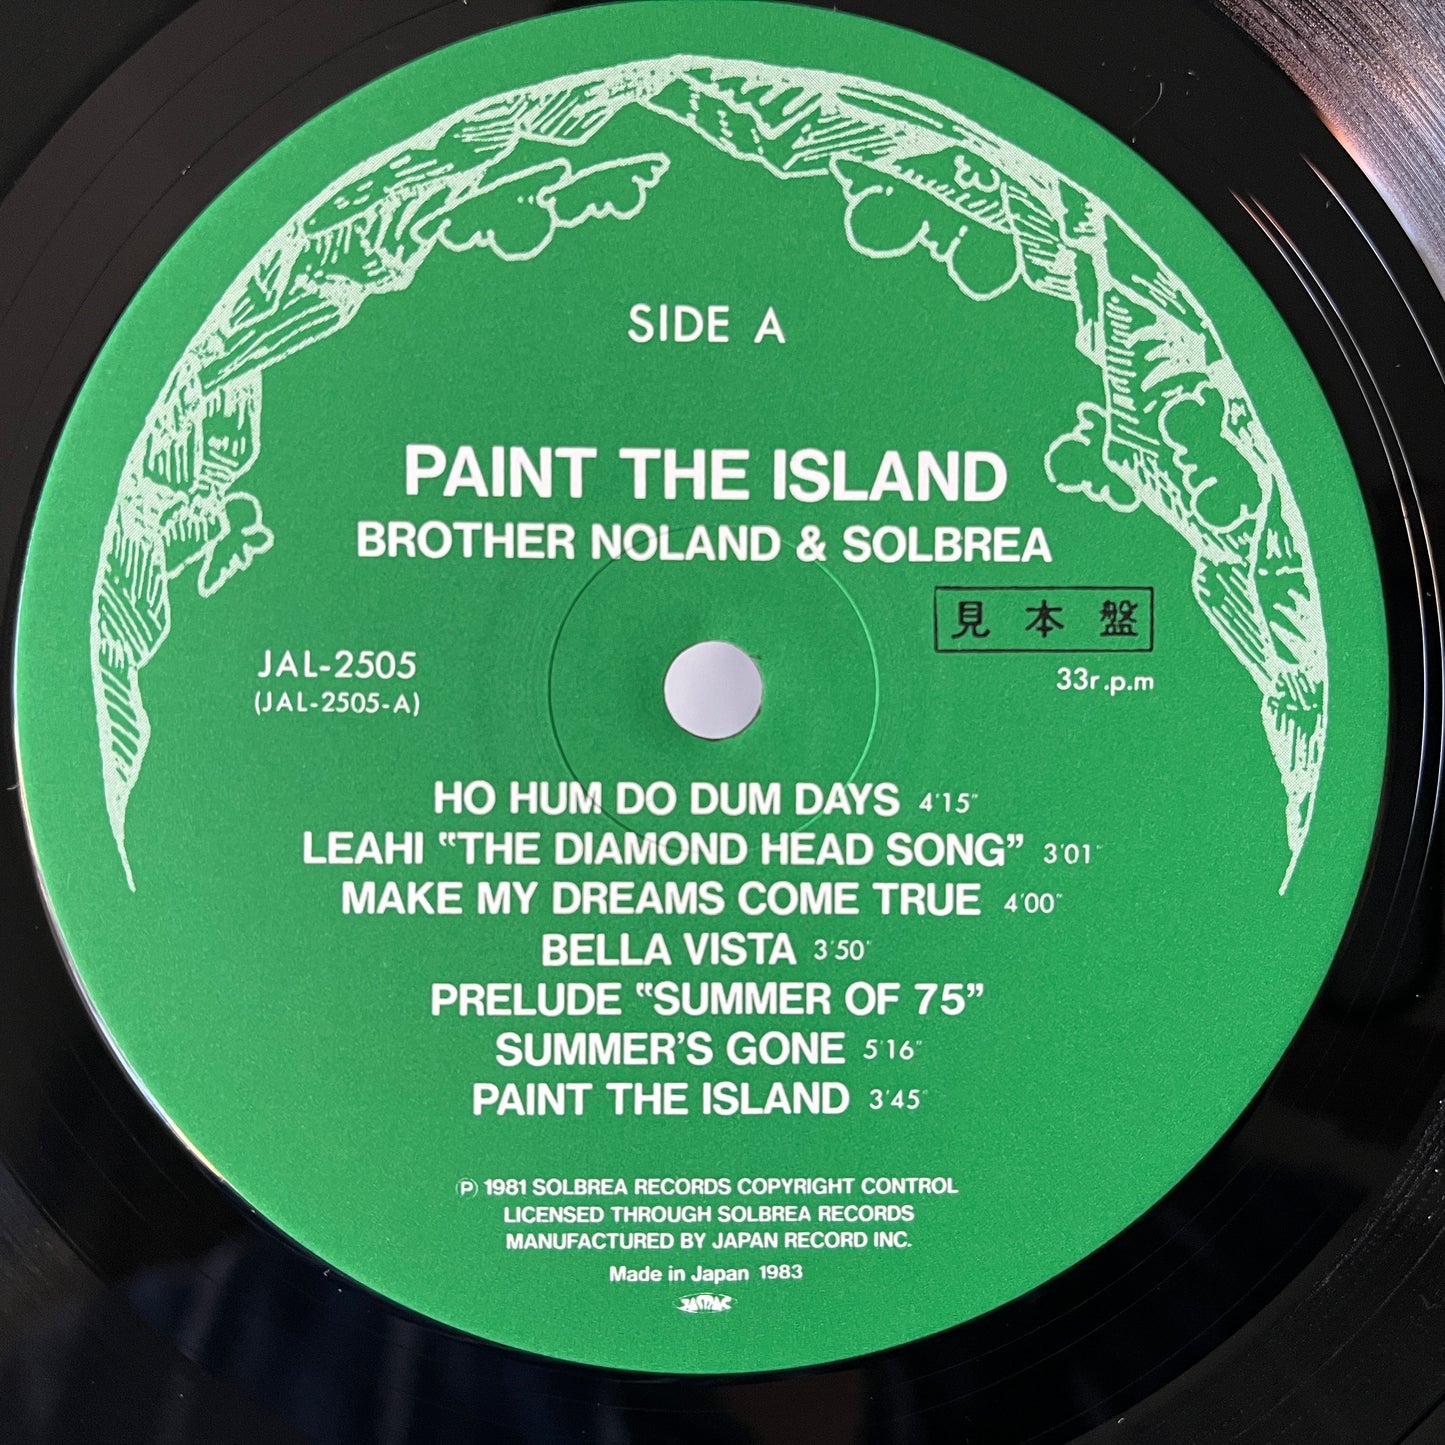 Brother Noland & Solbrea – Paint The Island